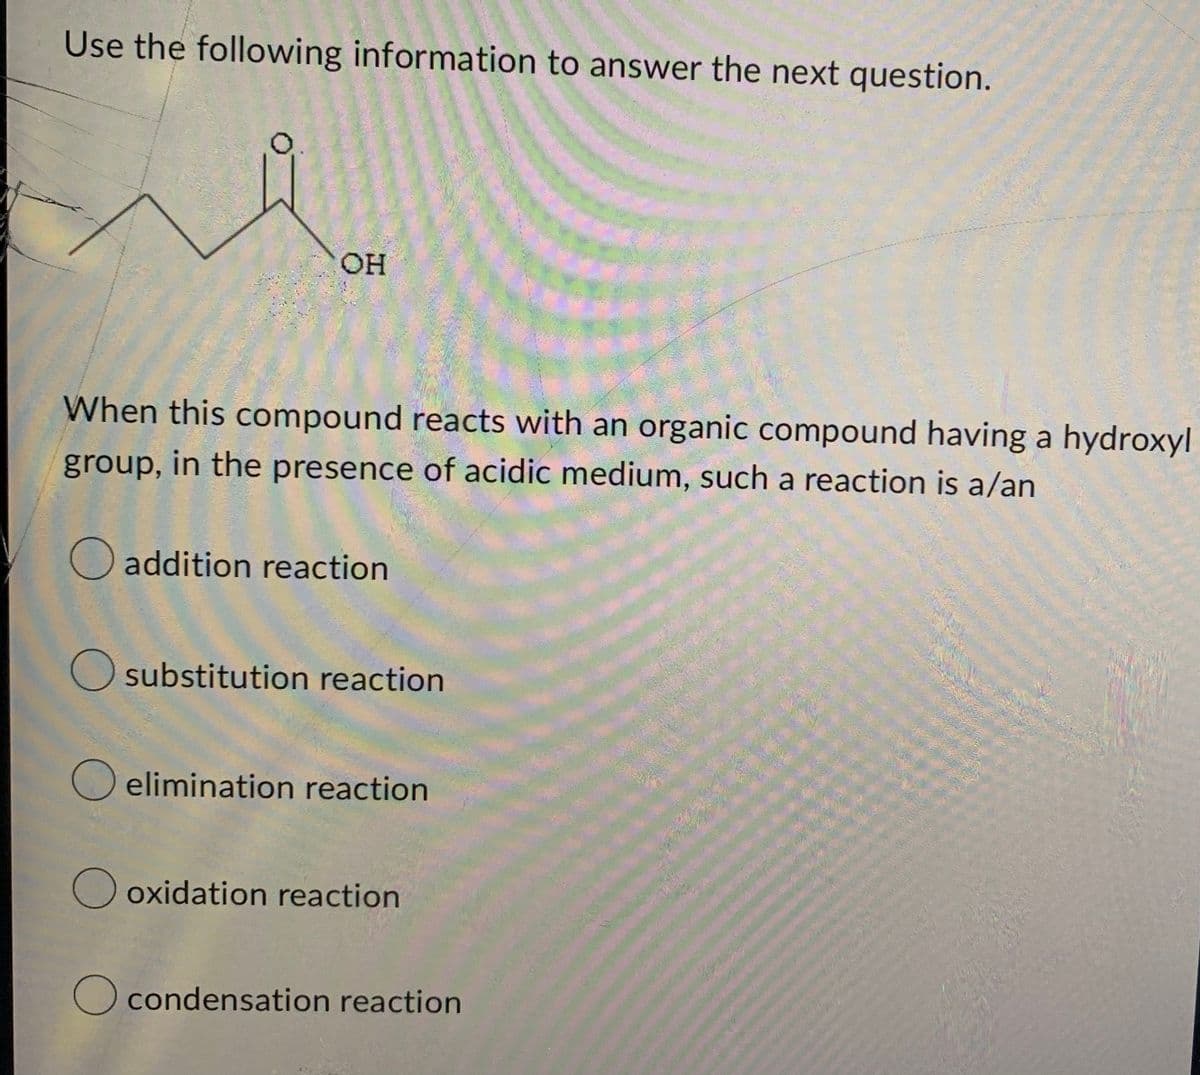 Use the following information to answer the next question.
OH
When this compound reacts with an organic compound having a hydroxyl
group, in the presence of acidic medium, such a reaction is a/an
O addition reaction
O substitution reaction
O elimination reaction
Ooxidation reaction
O condensation reaction